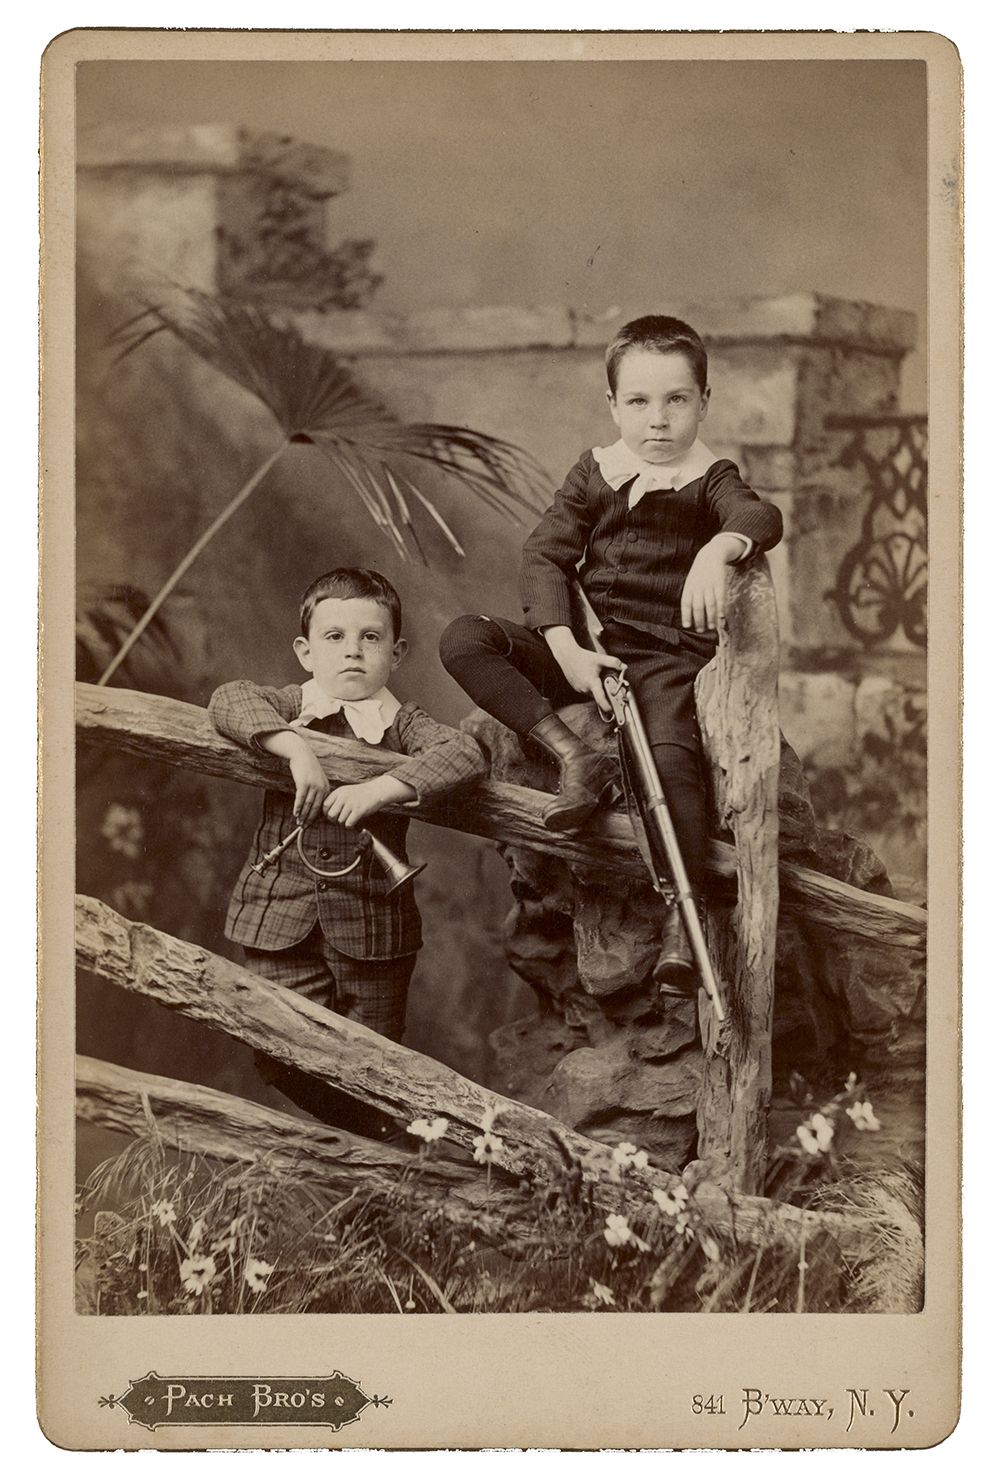 Photograph of brothers Alfred and Walter Pach as children.